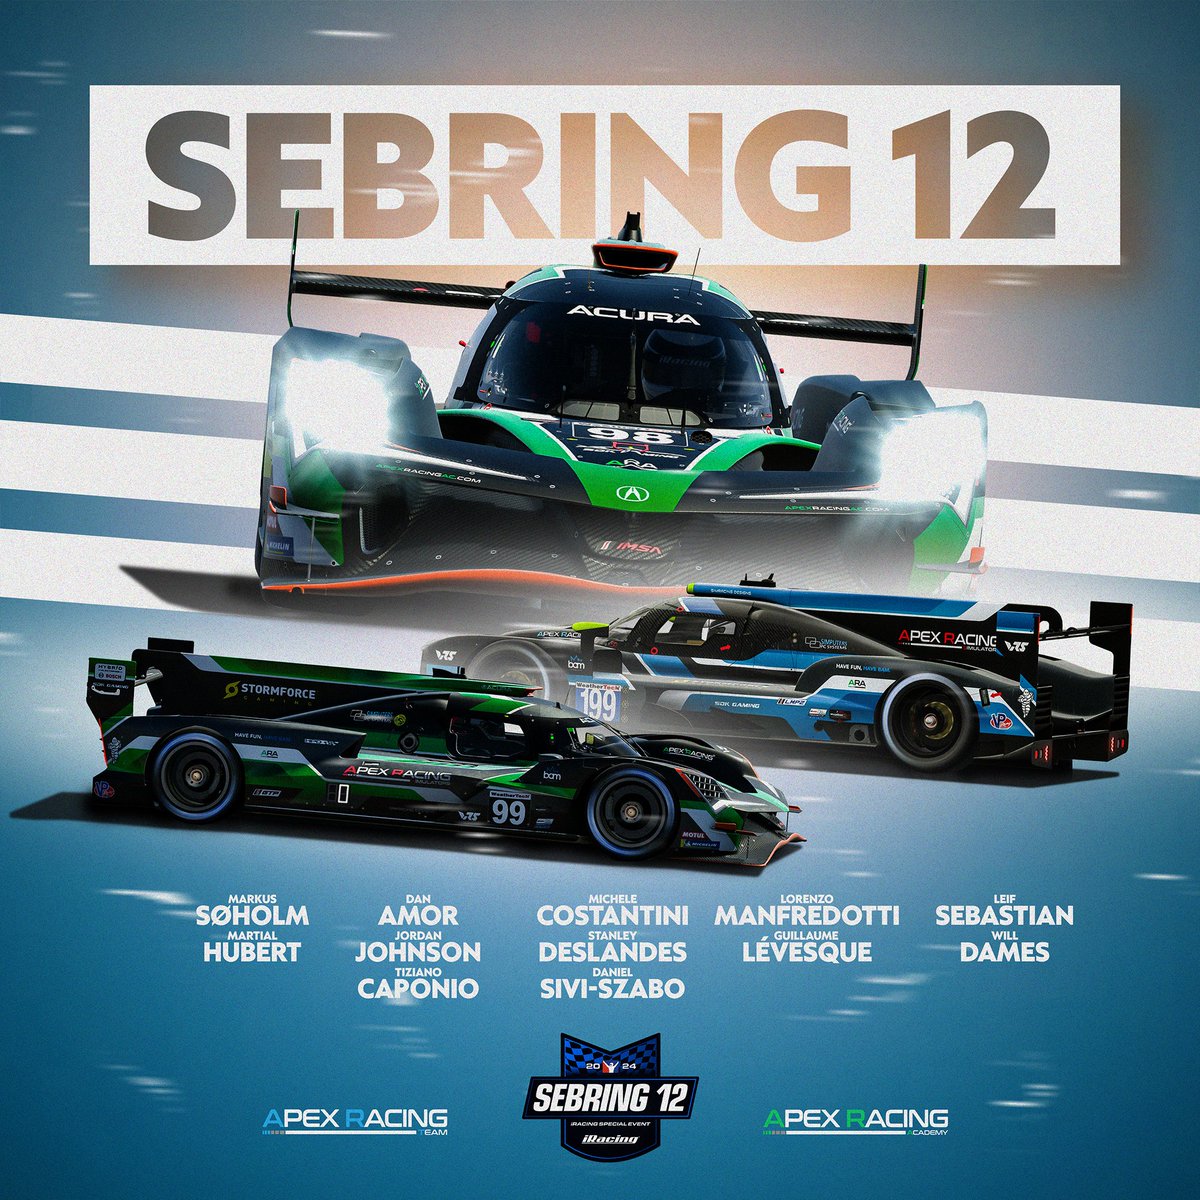 #Sebring12 - Ready for the bumps! 🇺🇸 Our line-ups to take on the legendary Sebring 12 Hours starting tomorrow! #apexracingteam #iracing #vcoesports